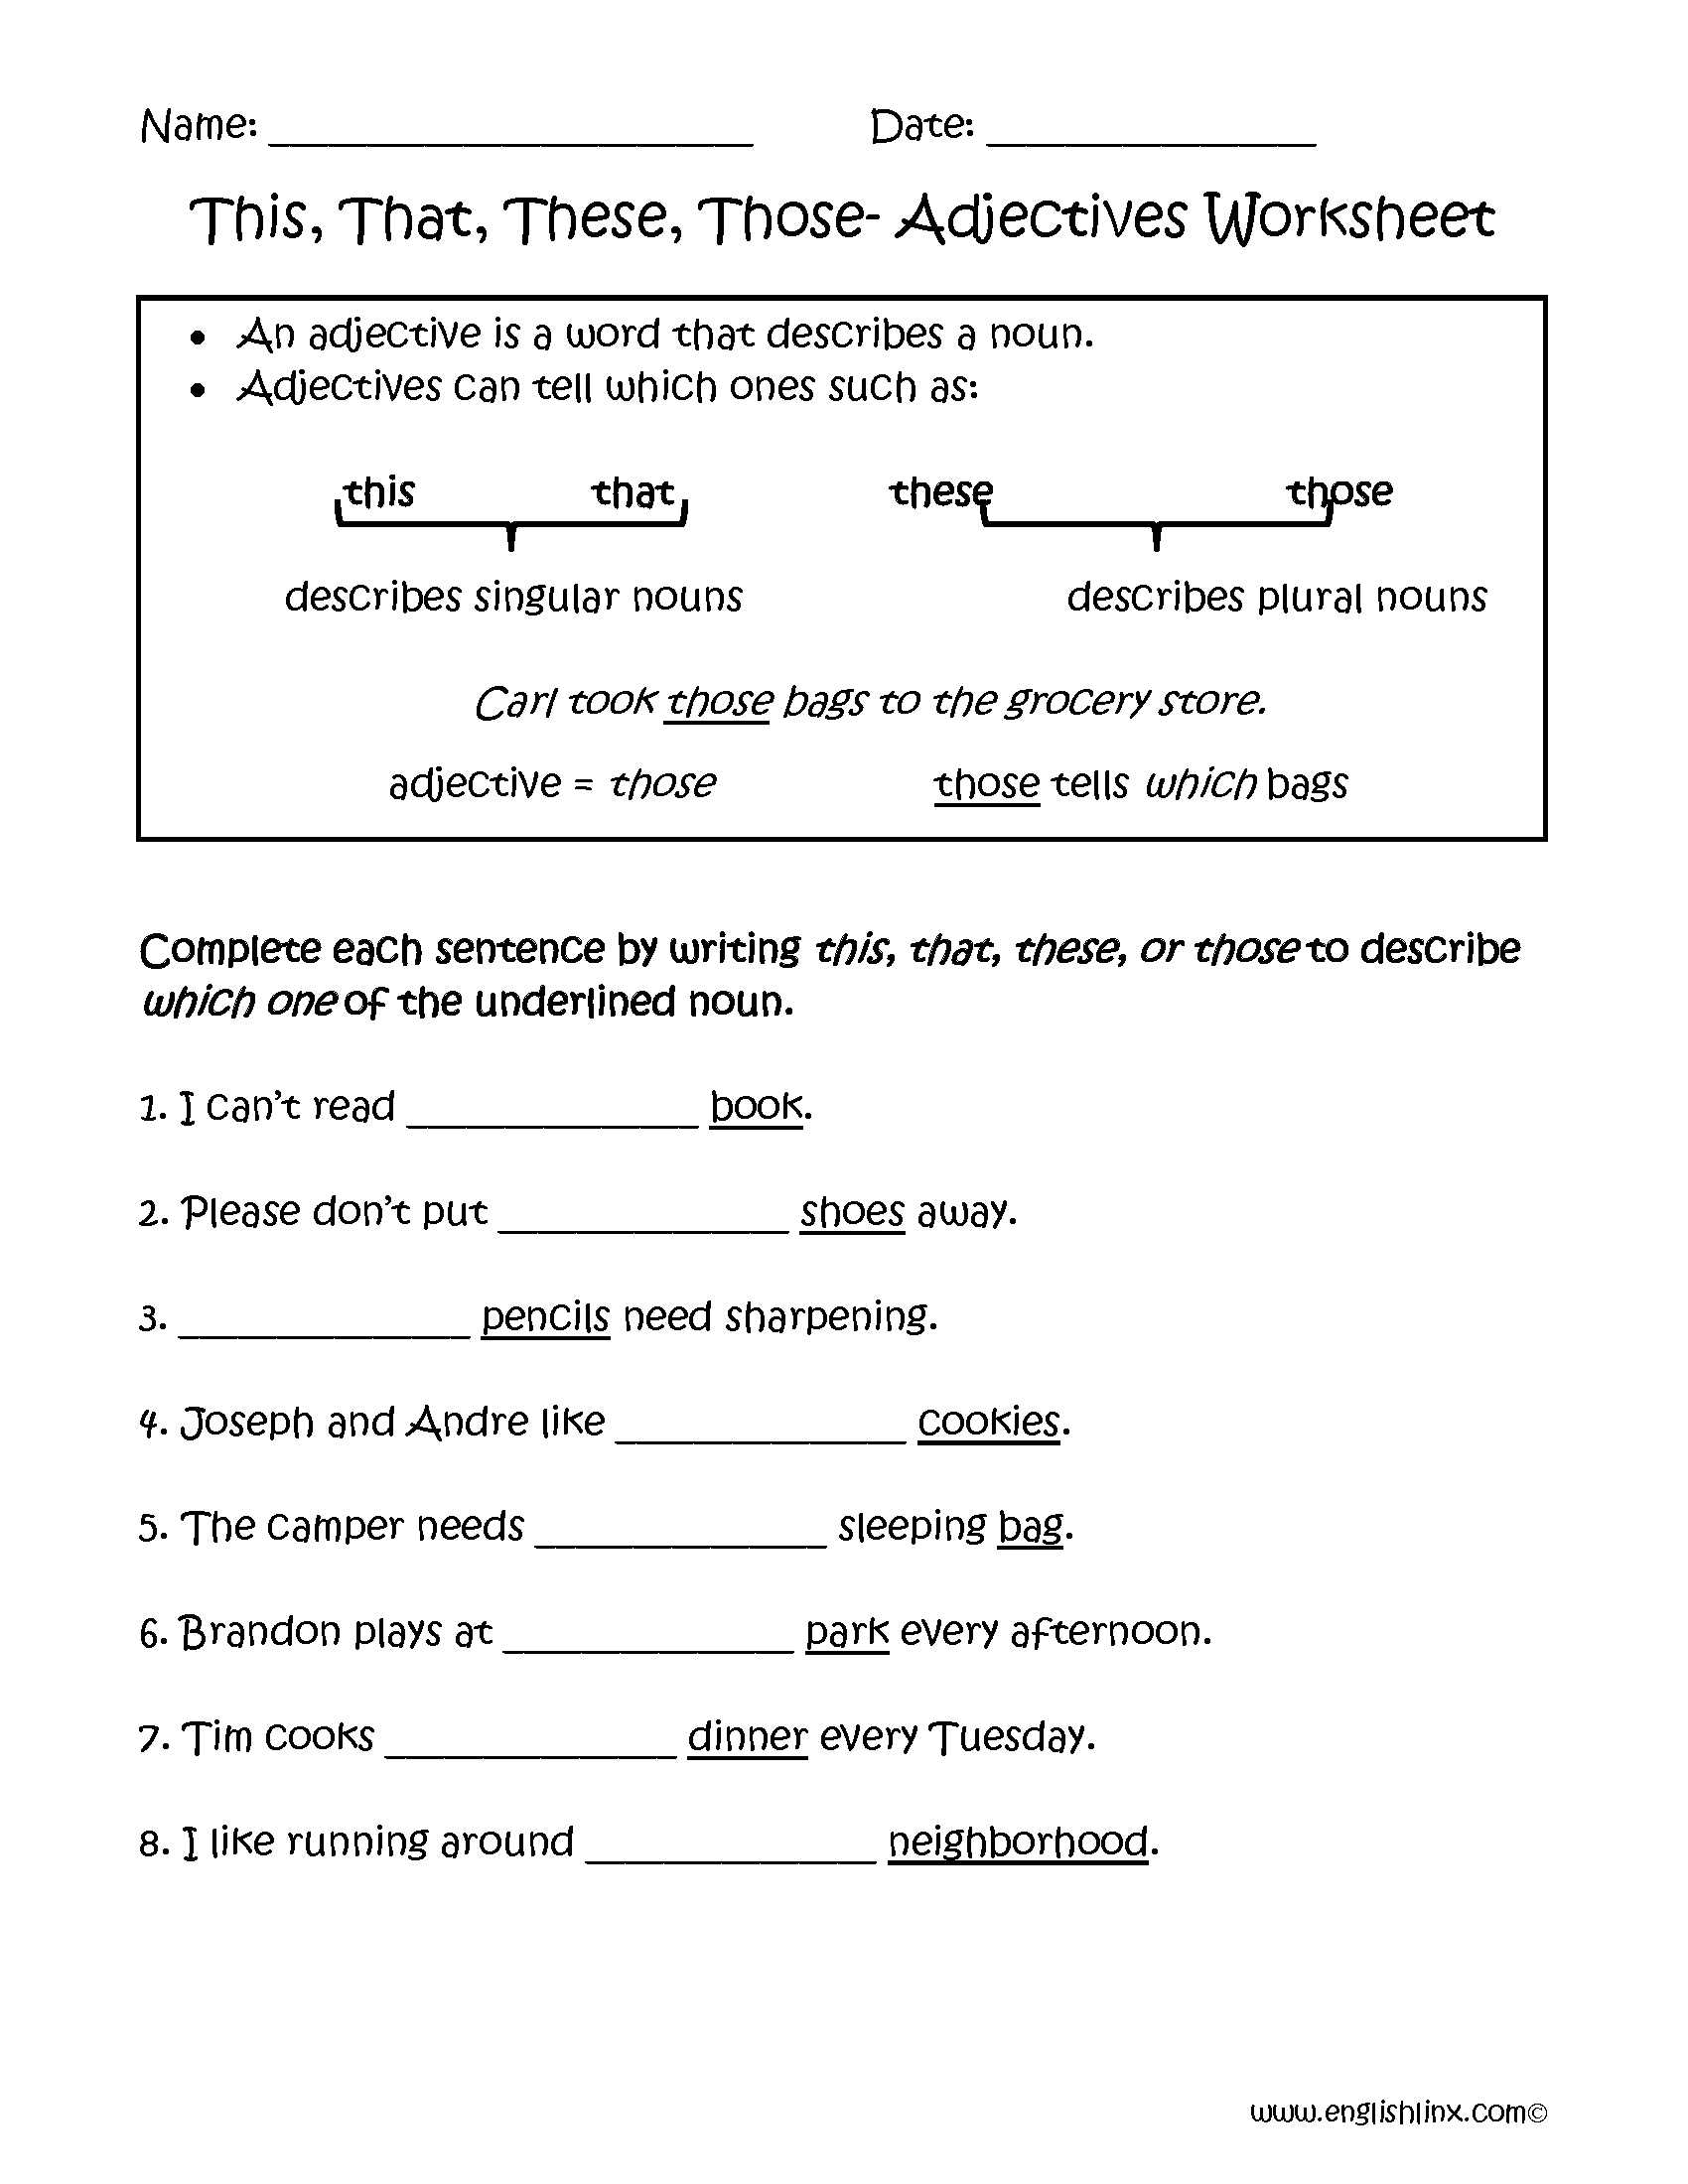 50-adjectives-worksheets-for-5th-grade-on-quizizz-free-printable